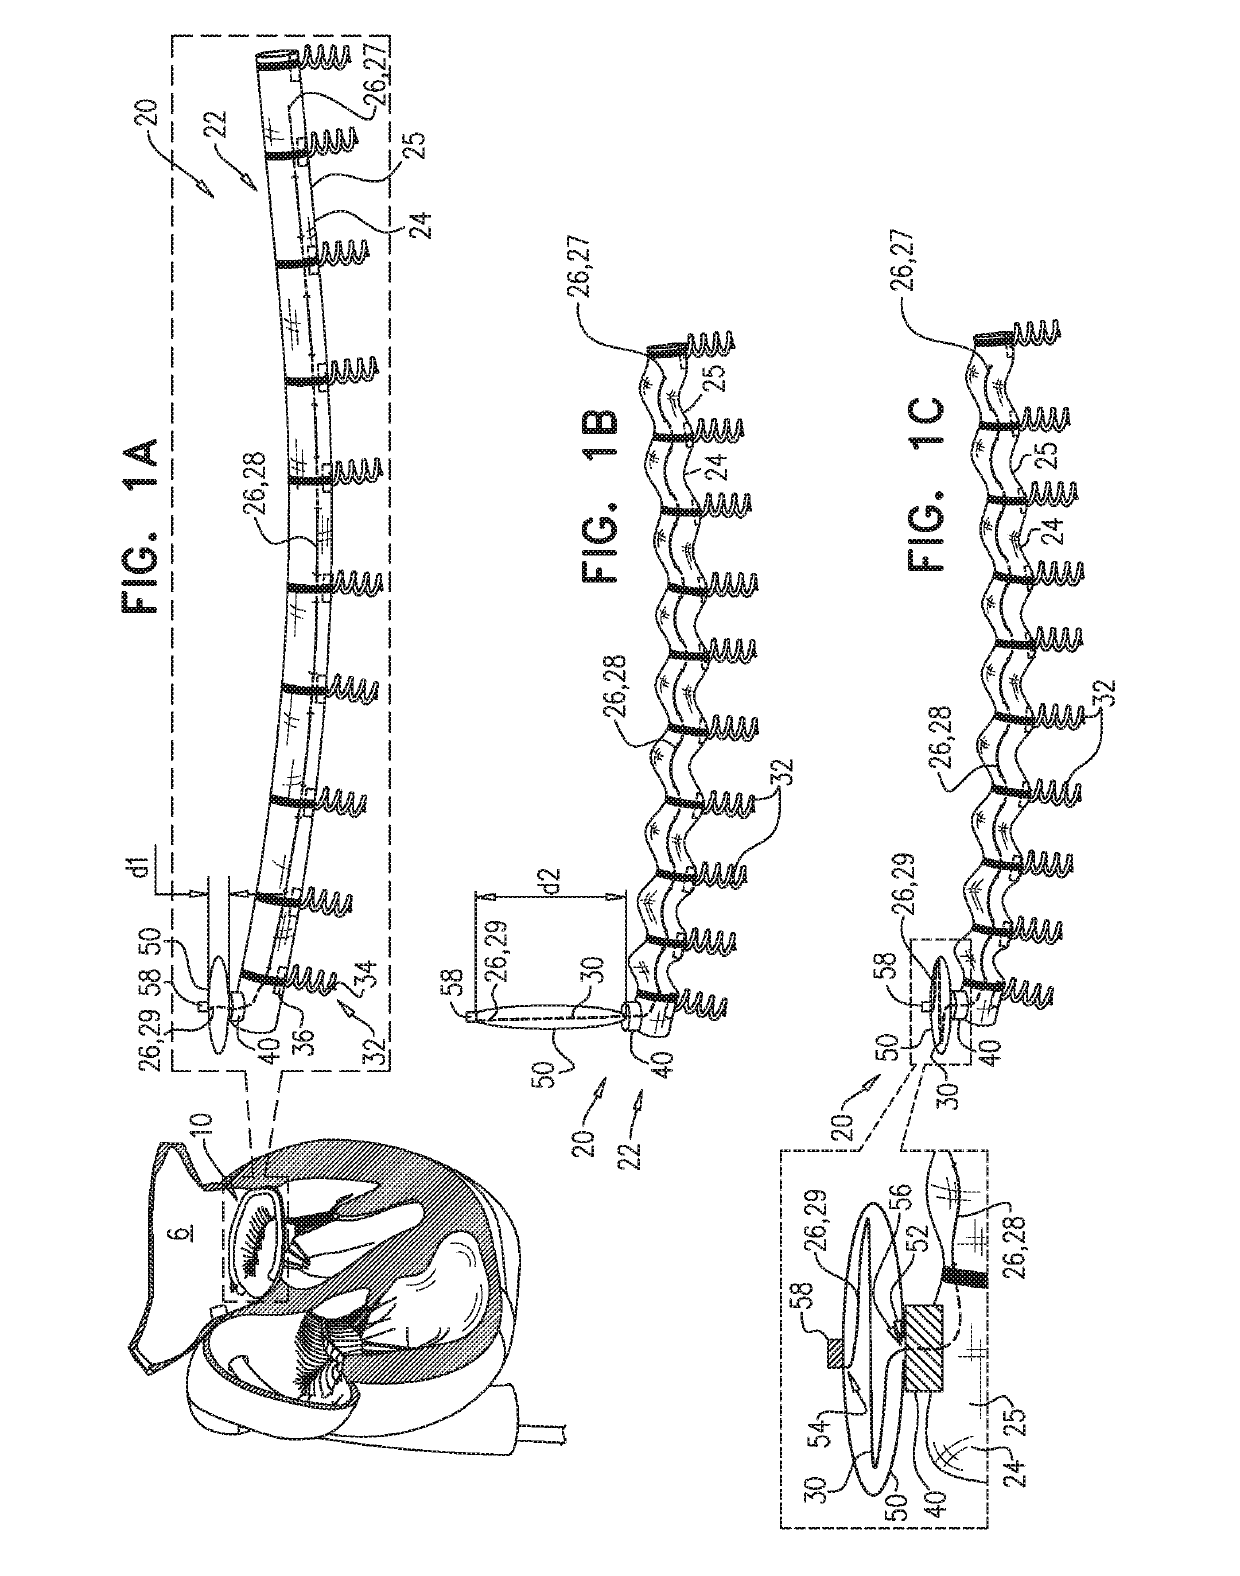 Implant-cinching devices and systems